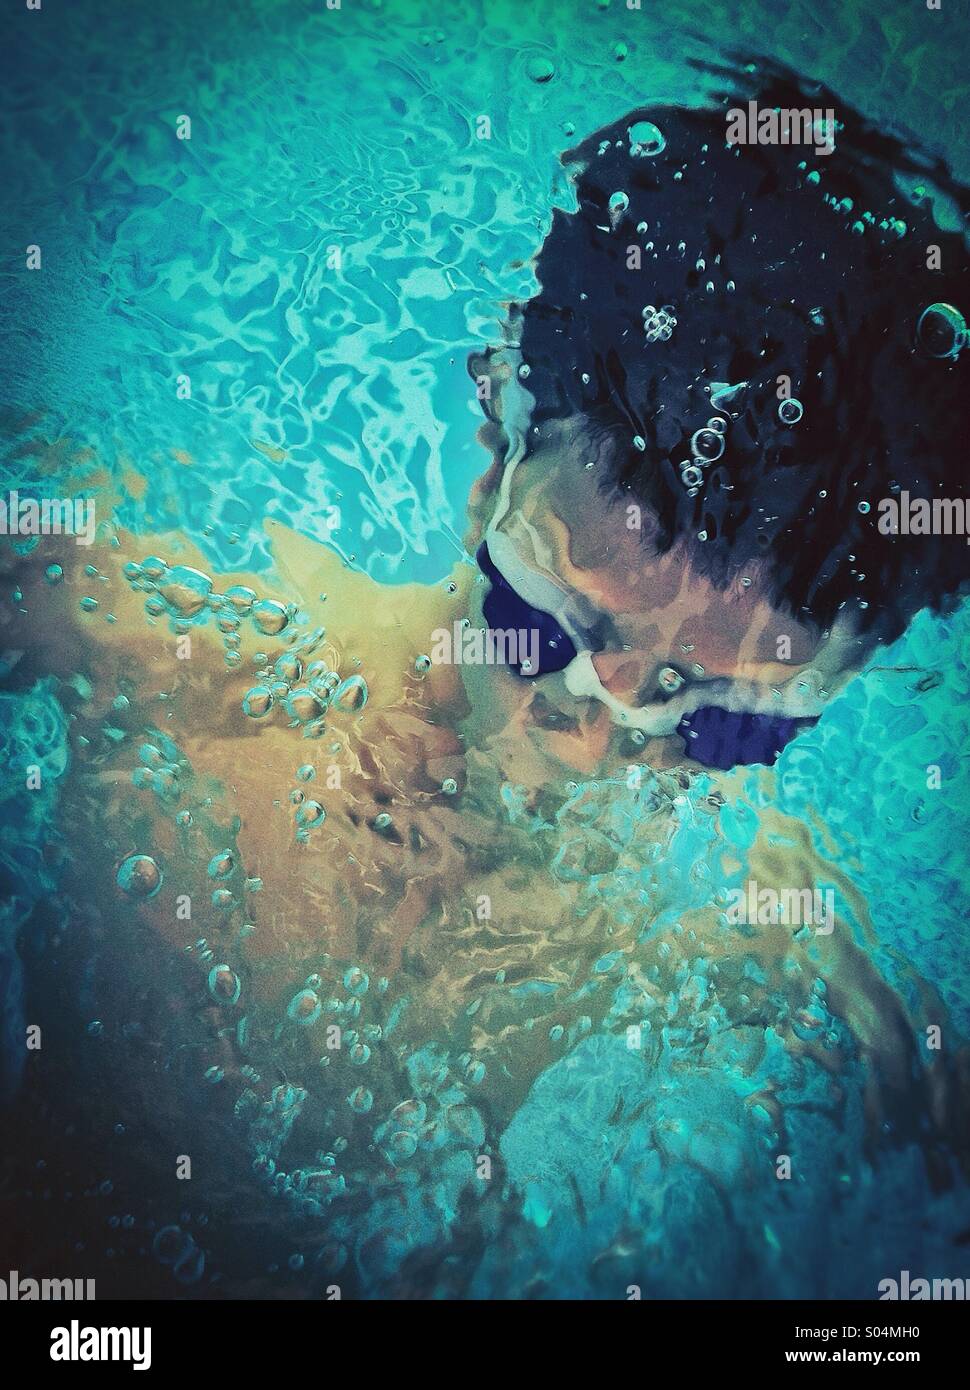 Boy playing under water in a swimming pool Stock Photo